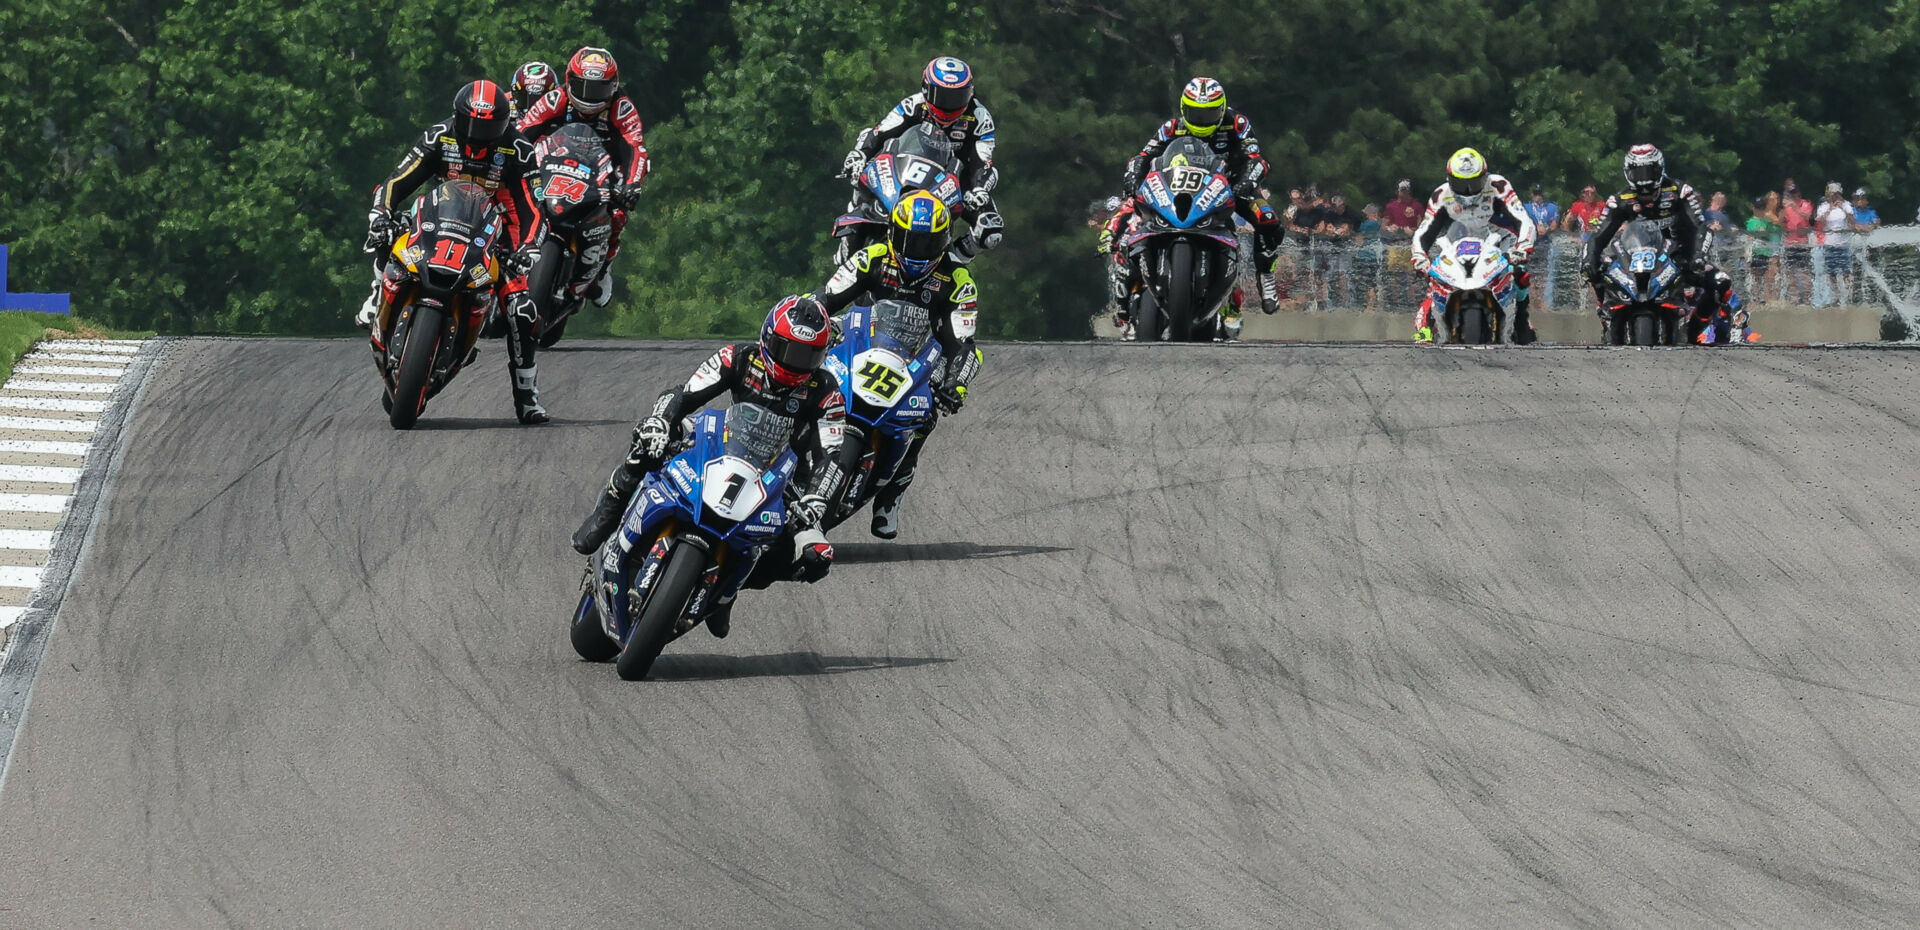 Jake Gagne (1) leads Cameron Petersen (45), Mathew Scholtz (11), Richie Escalante (54), Cameron Beaubier (6), PJ Jacobsen (99), and the rest of the MotoAmerica Superbike field at the start of Race Two at Barber Motorsports Park. Photo by Brian J. Nelson.